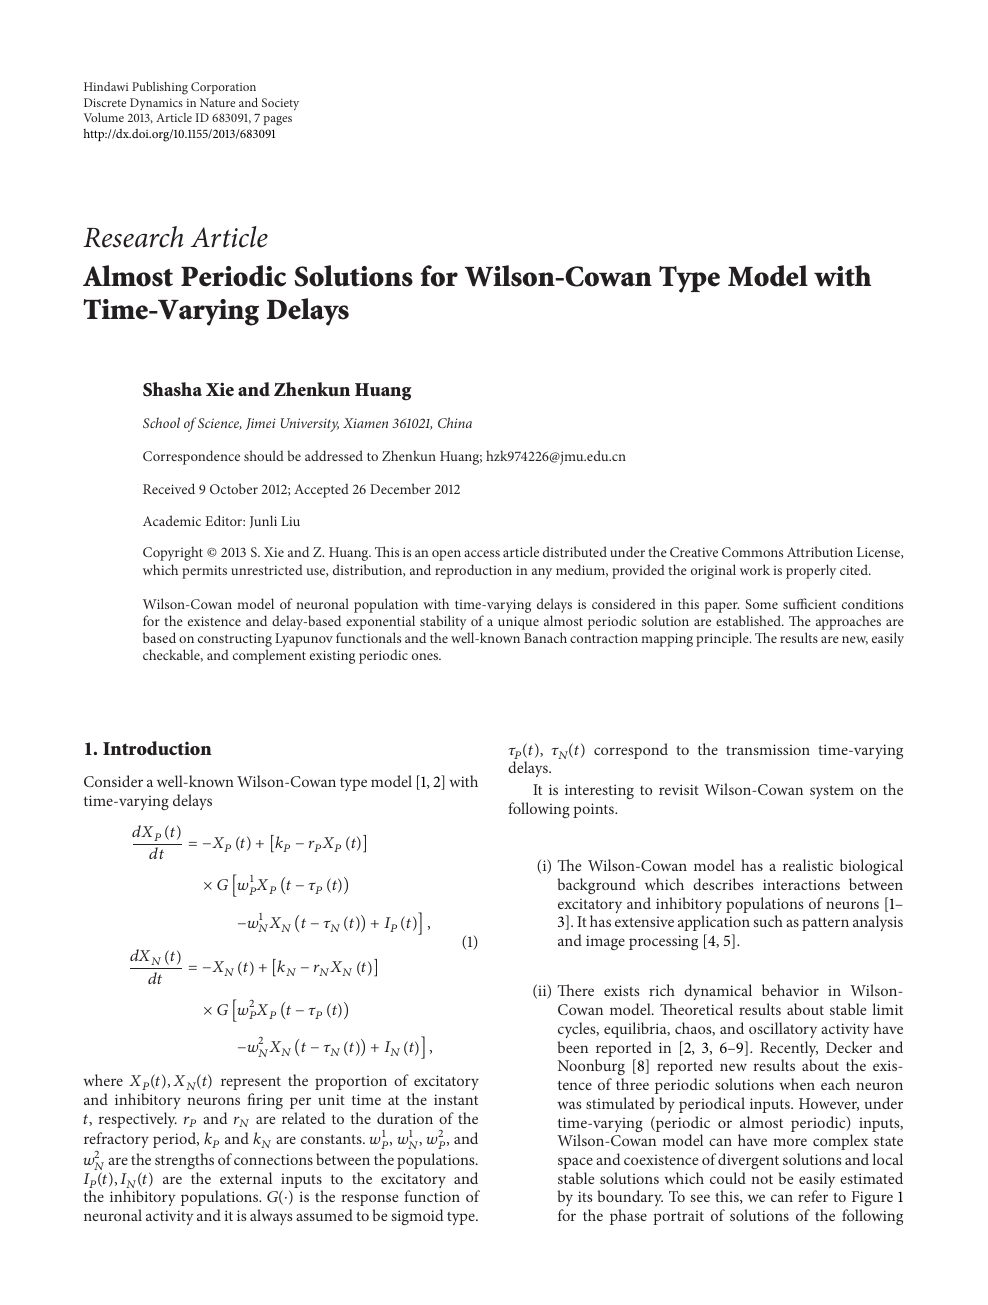 Almost Periodic Solutions For Wilson Cowan Type Model With Time Varying Delays Topic Of Research Paper In Mathematics Download Scholarly Article Pdf And Read For Free On Cyberleninka Open Science Hub